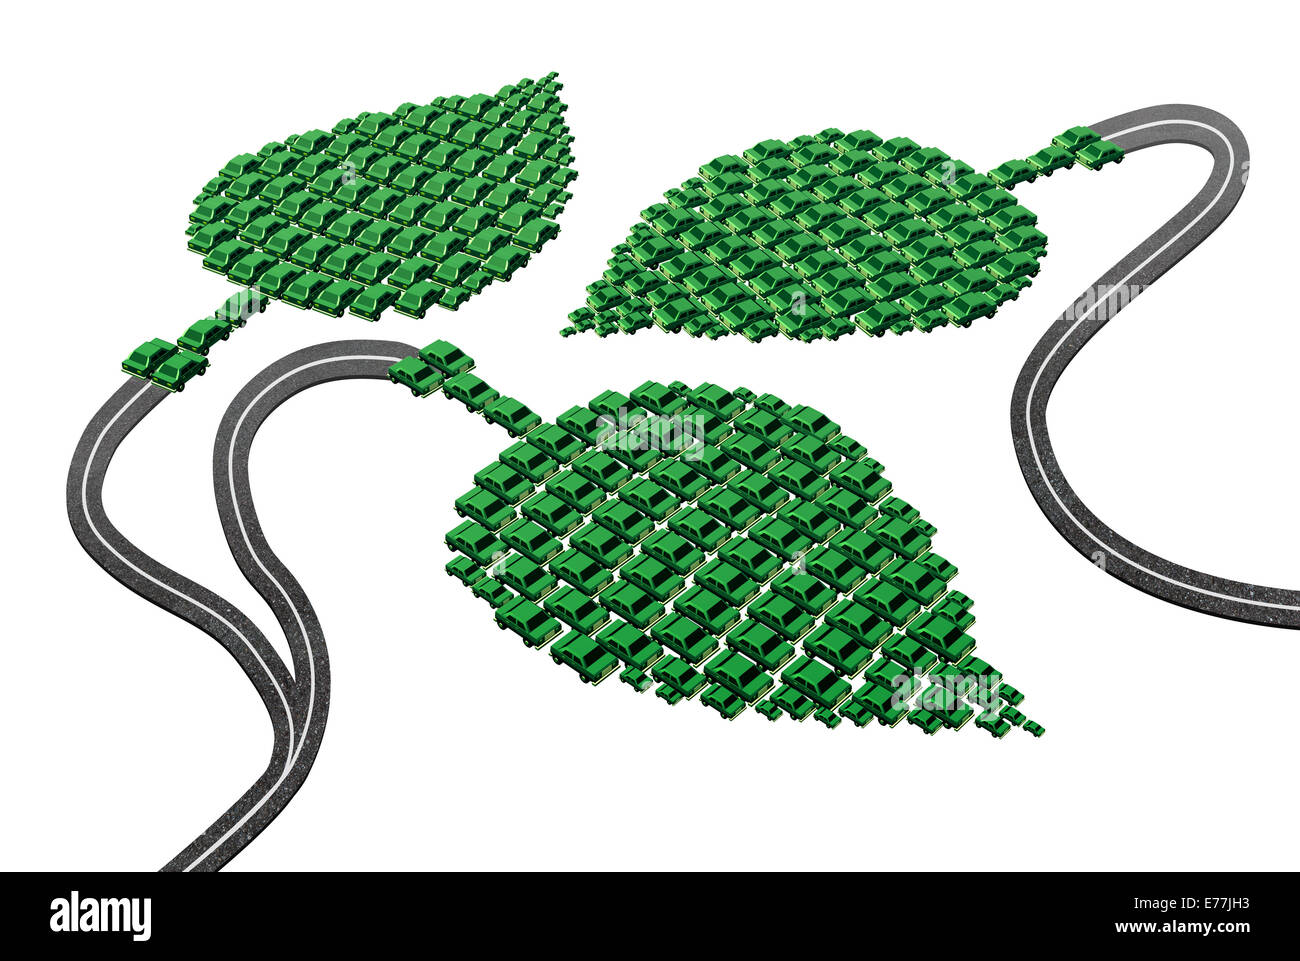 Green transport concept as a group of cars and automobiles in a leaf shape connected with roads as a metaphor for alternative fuel as electric power biofuel or fuel cell hydrogen as a symbol for the future of environmentaly friendly transportation  soluti Stock Photo